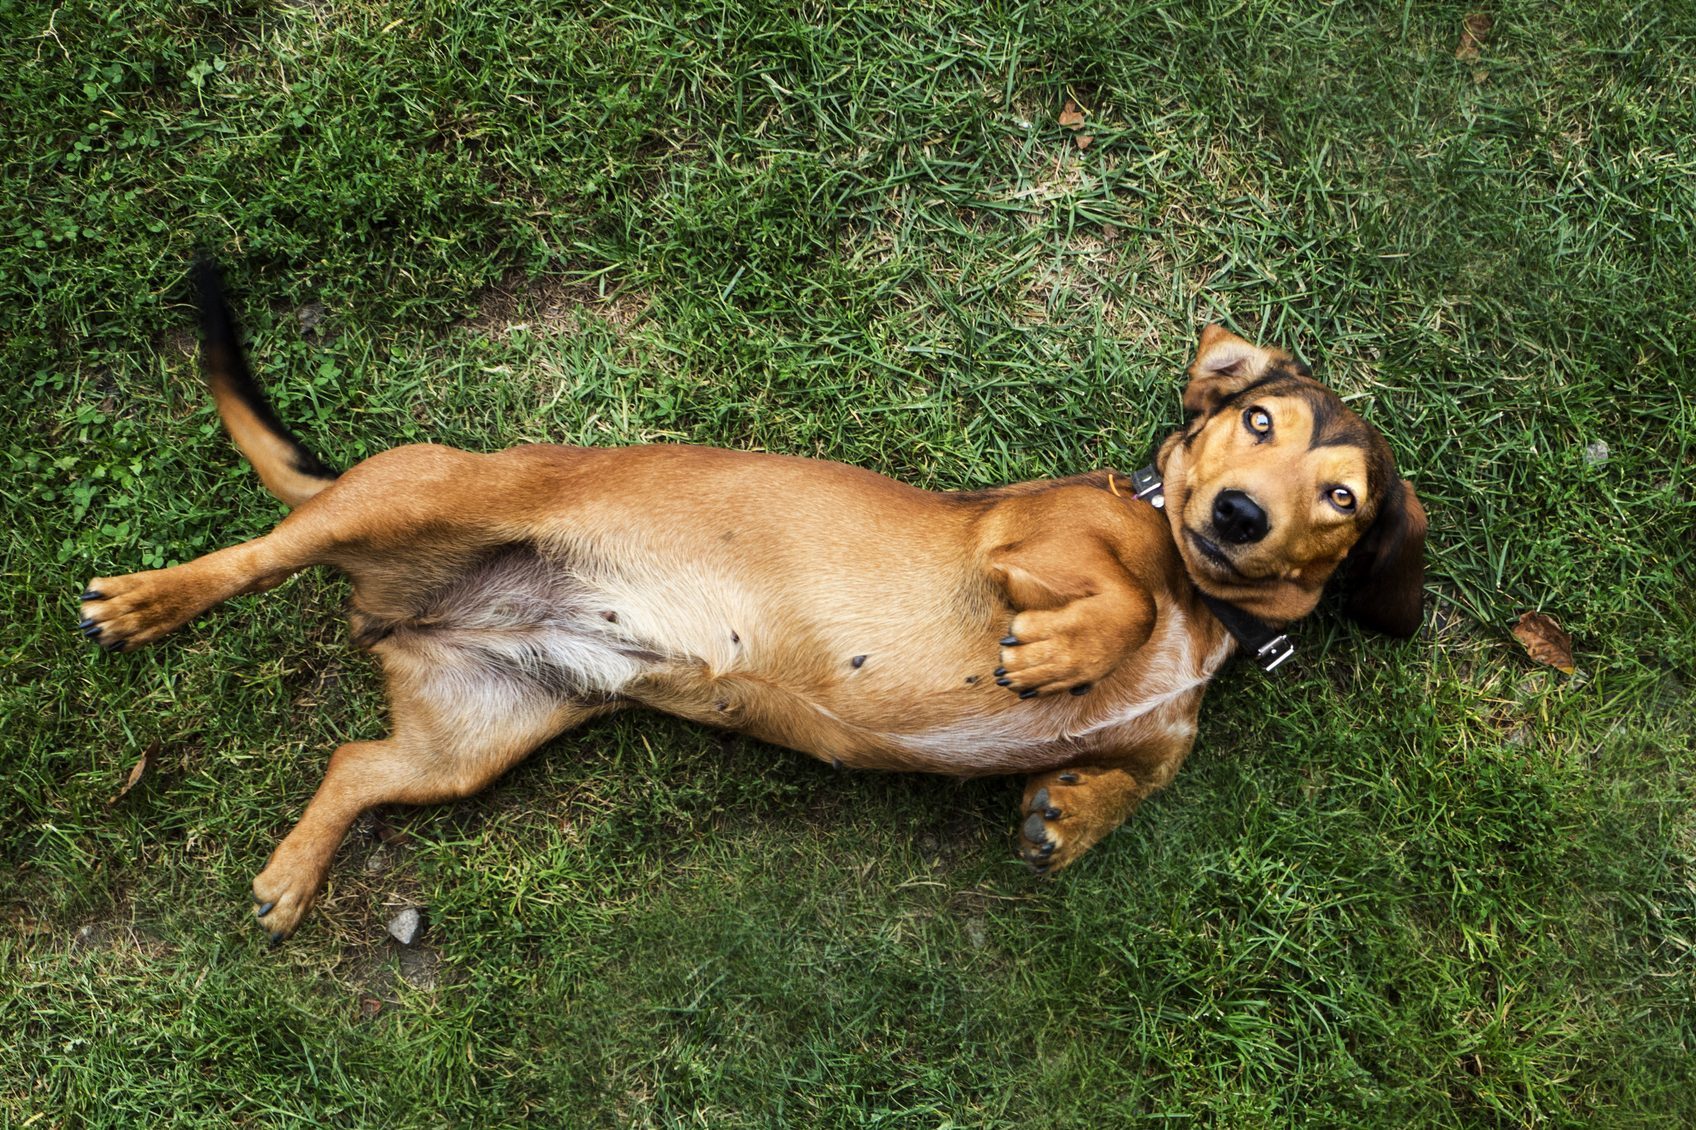 Overhead view of a dog rolling around on the grass, Poland